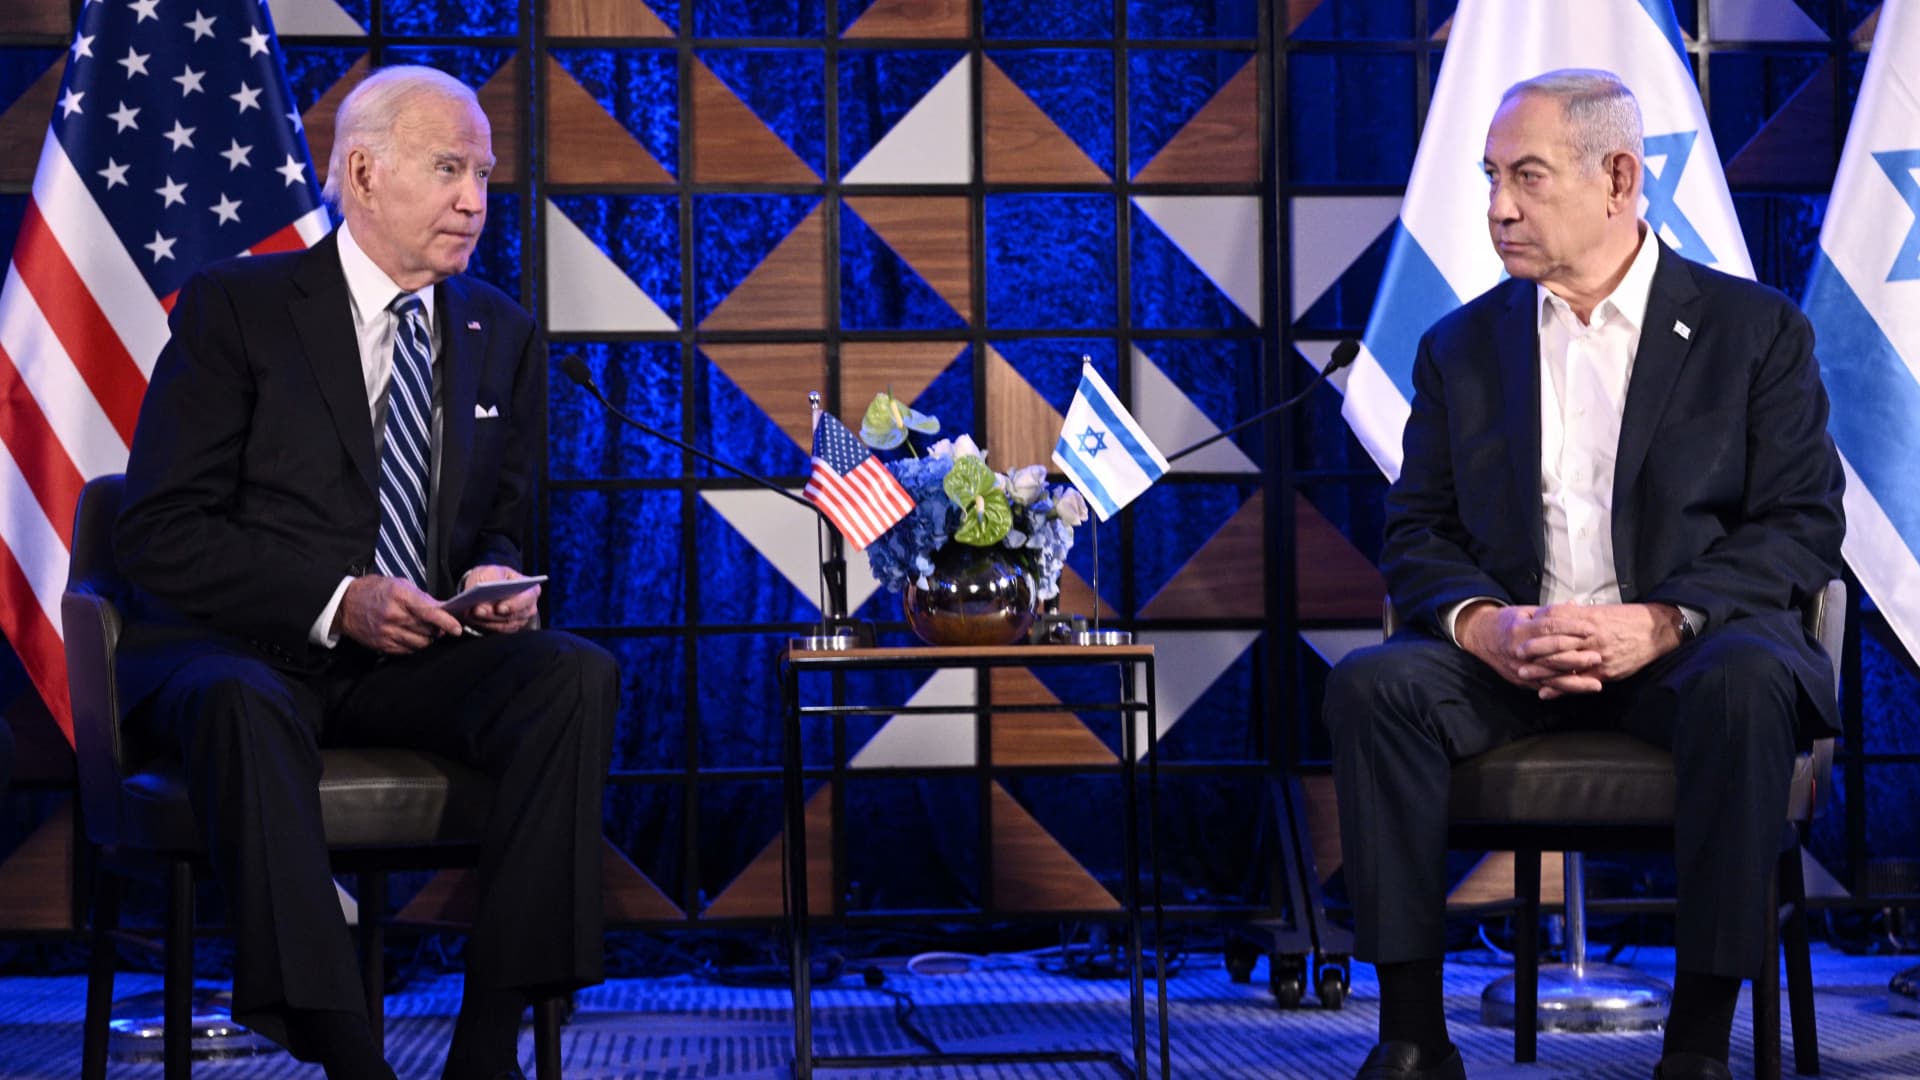 Biden administration discussing slowing some weaponry deliveries to Israel to pressure Netanyahu